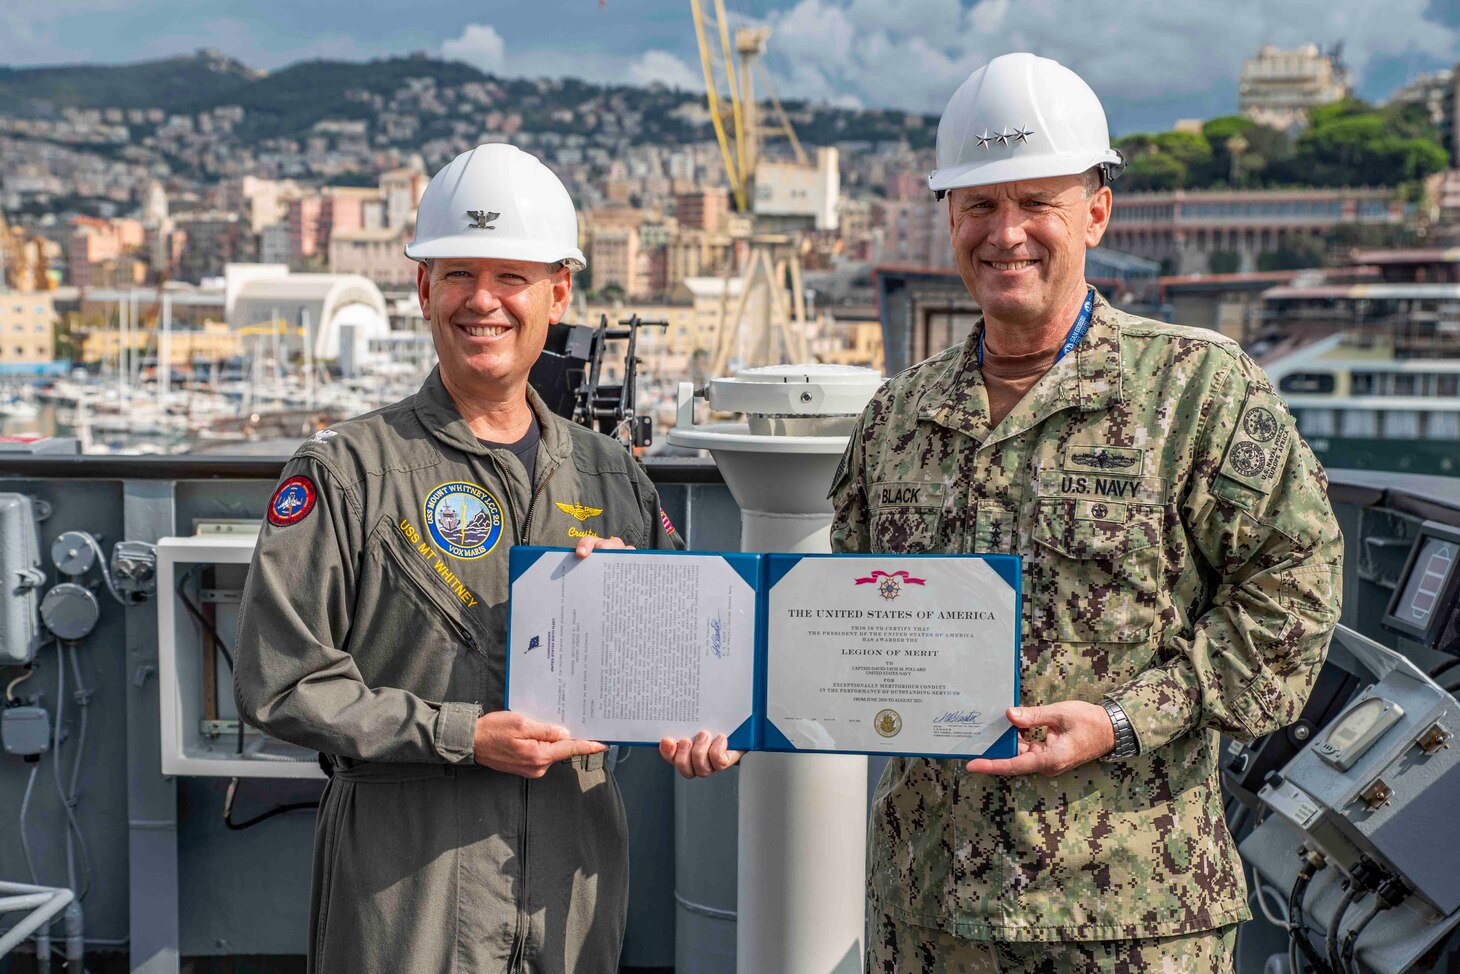 (Aug 31, 2021) Vice Adm. Gene Black, commander, U.S. Sixth Fleet, presents Capt. David Pollard, commanding officer of the Blue Ridge-class command and control ship USS Mount Whitney (LCC 20), with an award during the ship’s change of command in San Giorgio Del Porto in Genoa, Italy, August, 31, 2021.  Mount Whitney, the U.S. Sixth Fleet flagship, homeported in Gaeta, Italy entered its regularly scheduled overhaul to make improvements in order to increase the security and stability of the U.S. Sixth Fleet area of operations.